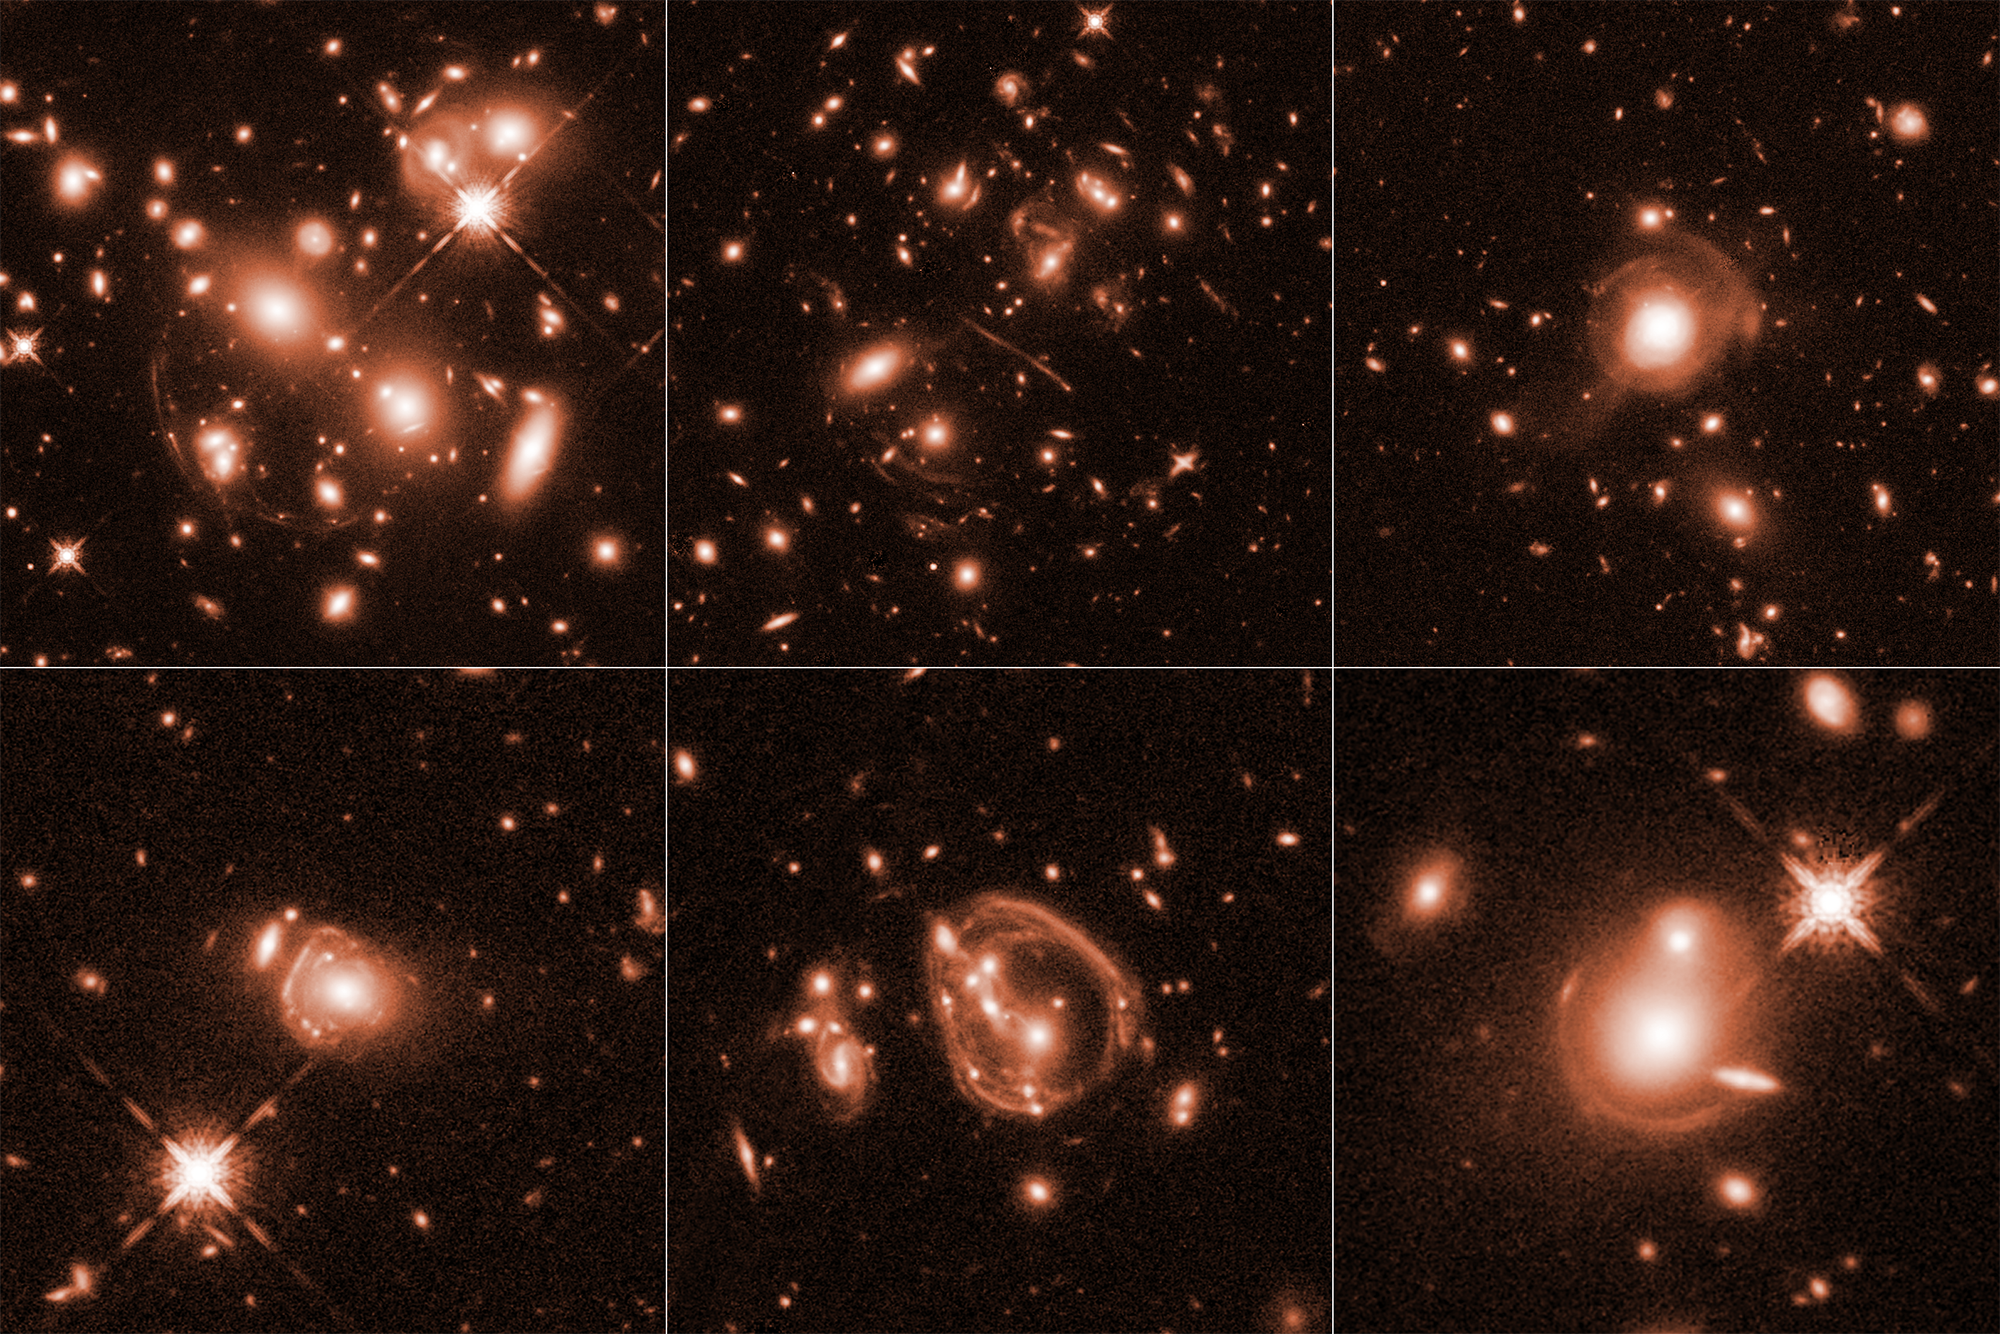 images of six galaxy clusters are arranged next to each other in a 3x2 grid